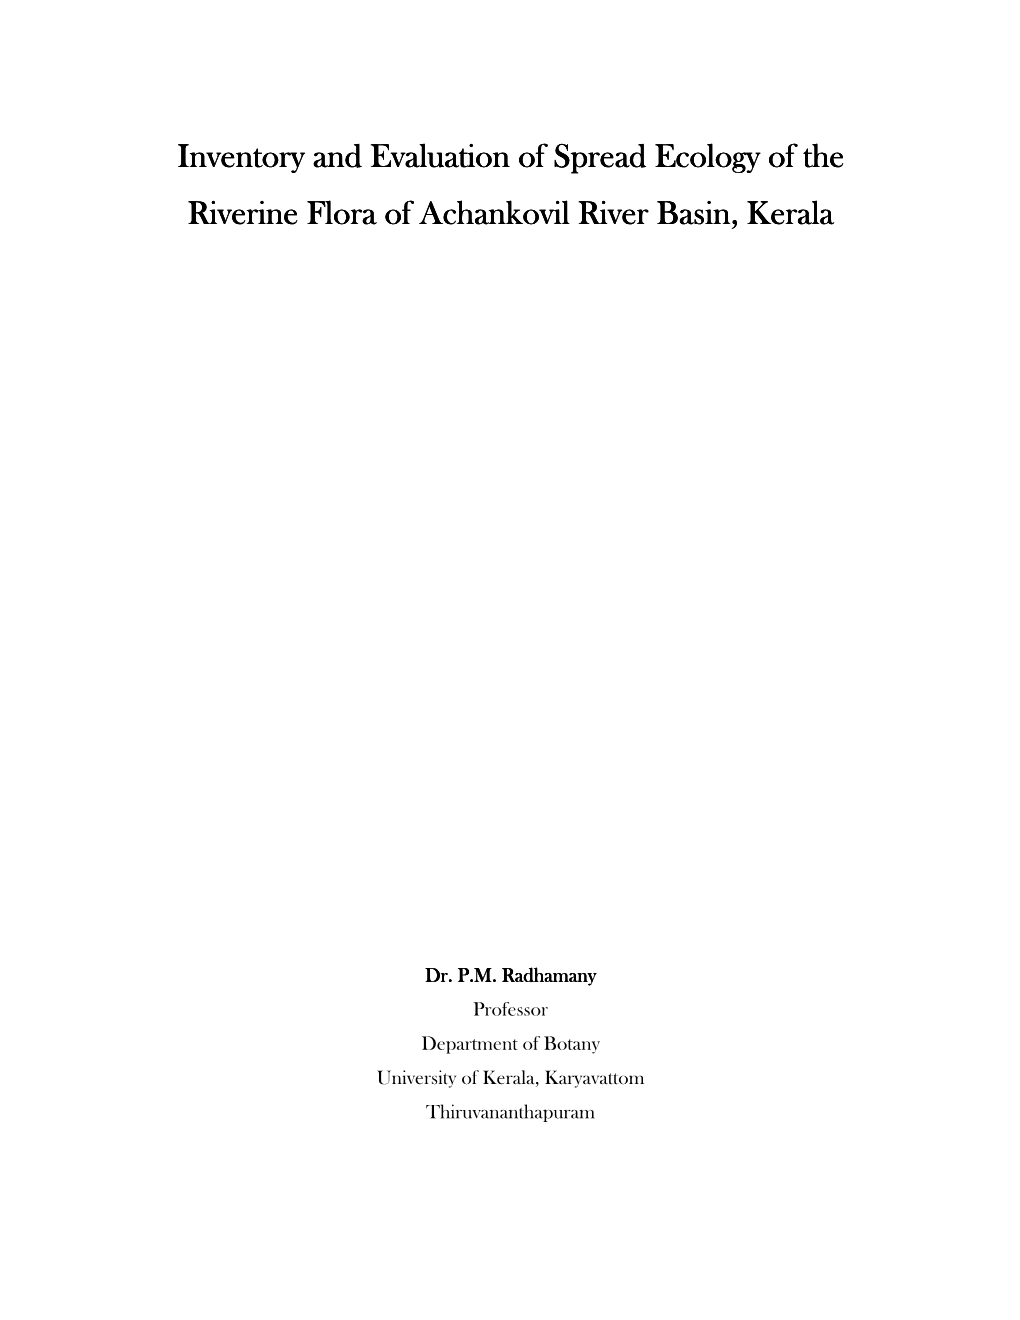 Inventory and Evaluation of Spread Ecology of the Riverine Flora of Achankovil River Basin, Kerala